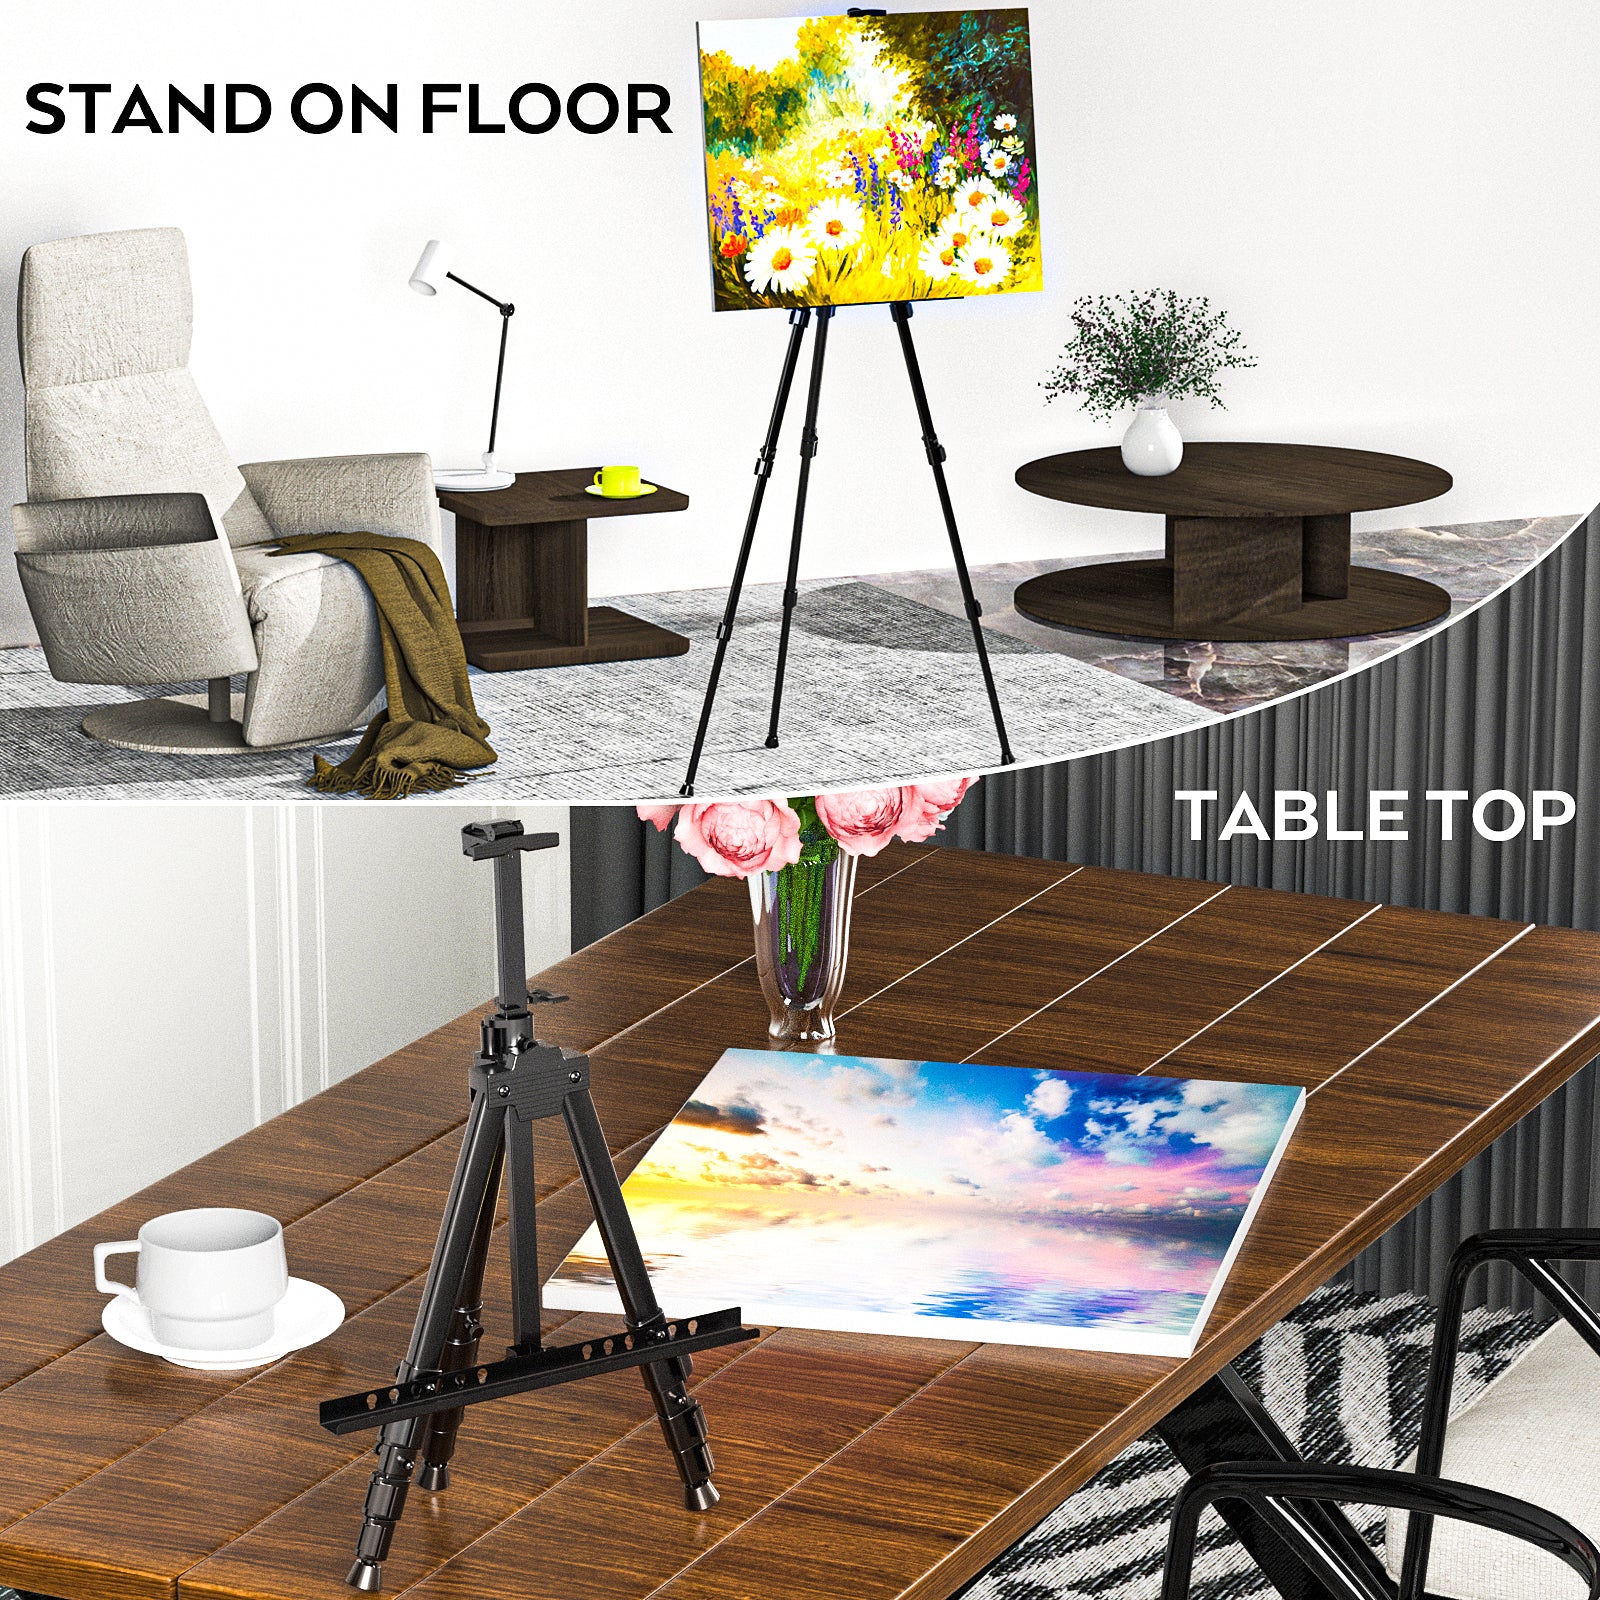 Nicpro Painting Easels for Display, Adjustable Height 17" to 63" Artist Easel Stand with Bag, Floor & Tabletop Drawing Easels for Adults, Painting Canvas, Wedding Signs, Poster - Holds 25 lbs